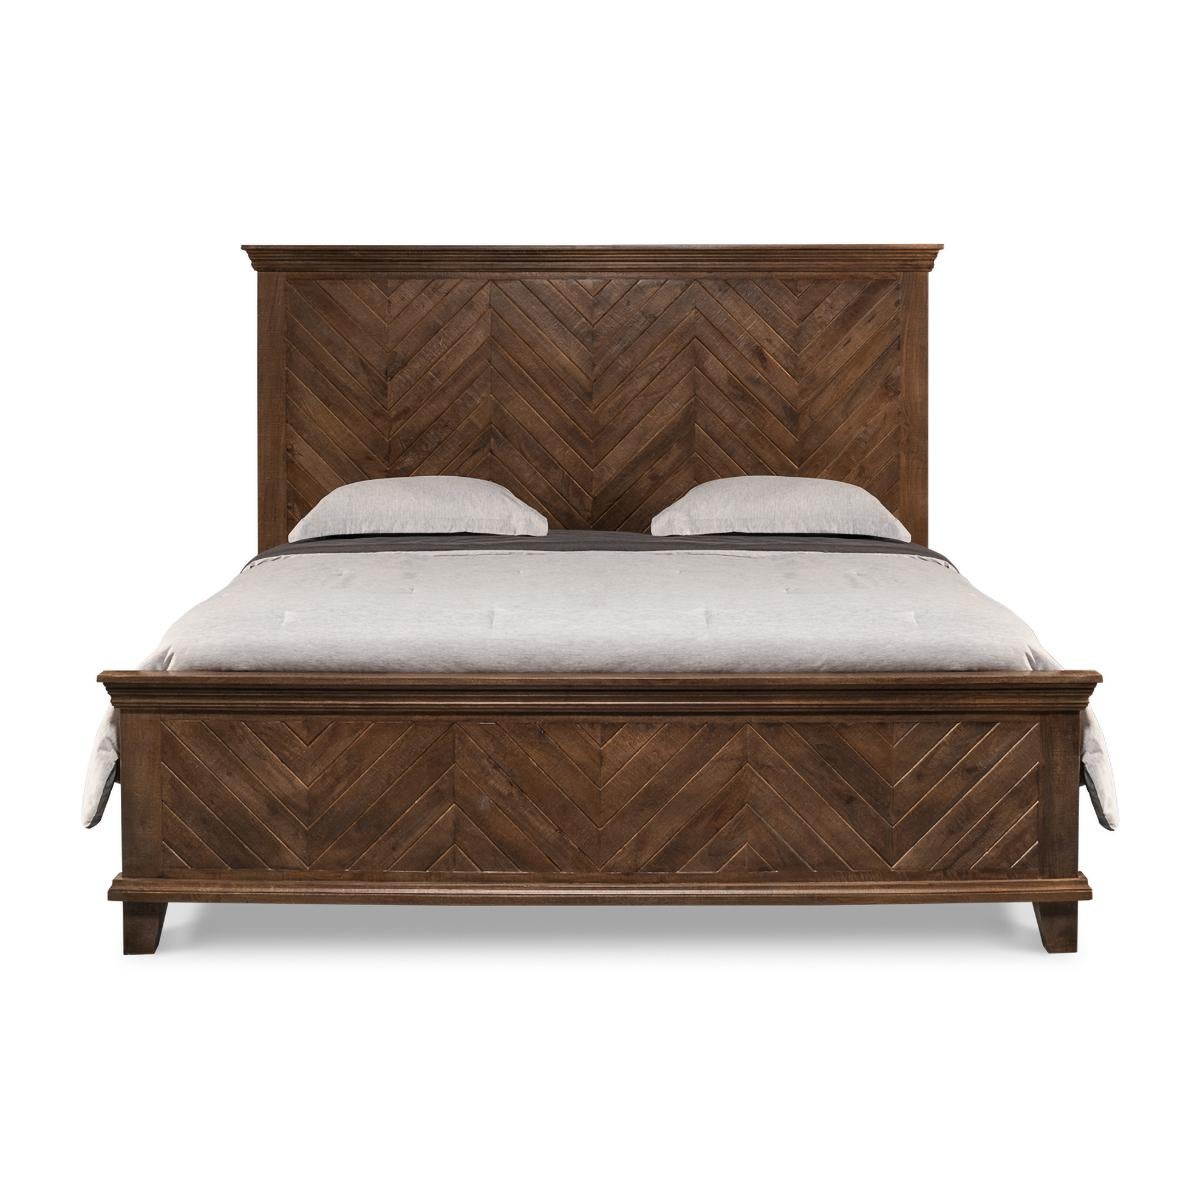 Rustic king size bed in a walnut finish this rustic bed's herringbone pattern to the head and footboard provide visual interest in a modern transitional style. Anchored by a state-of-the-art slat suspension system and raised tapered